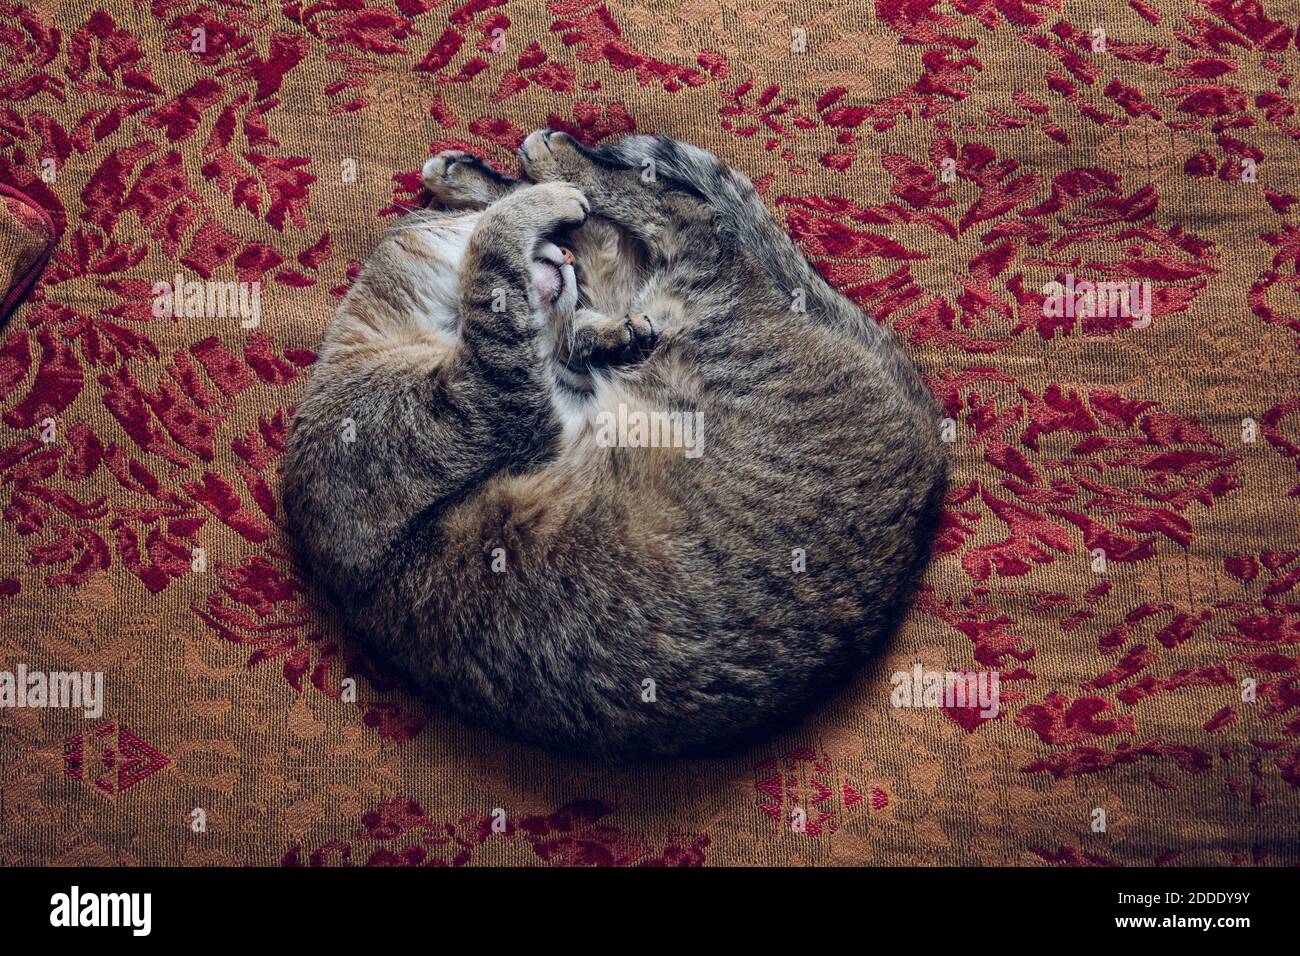 Cat sleeping on bed at home Banque D'Images